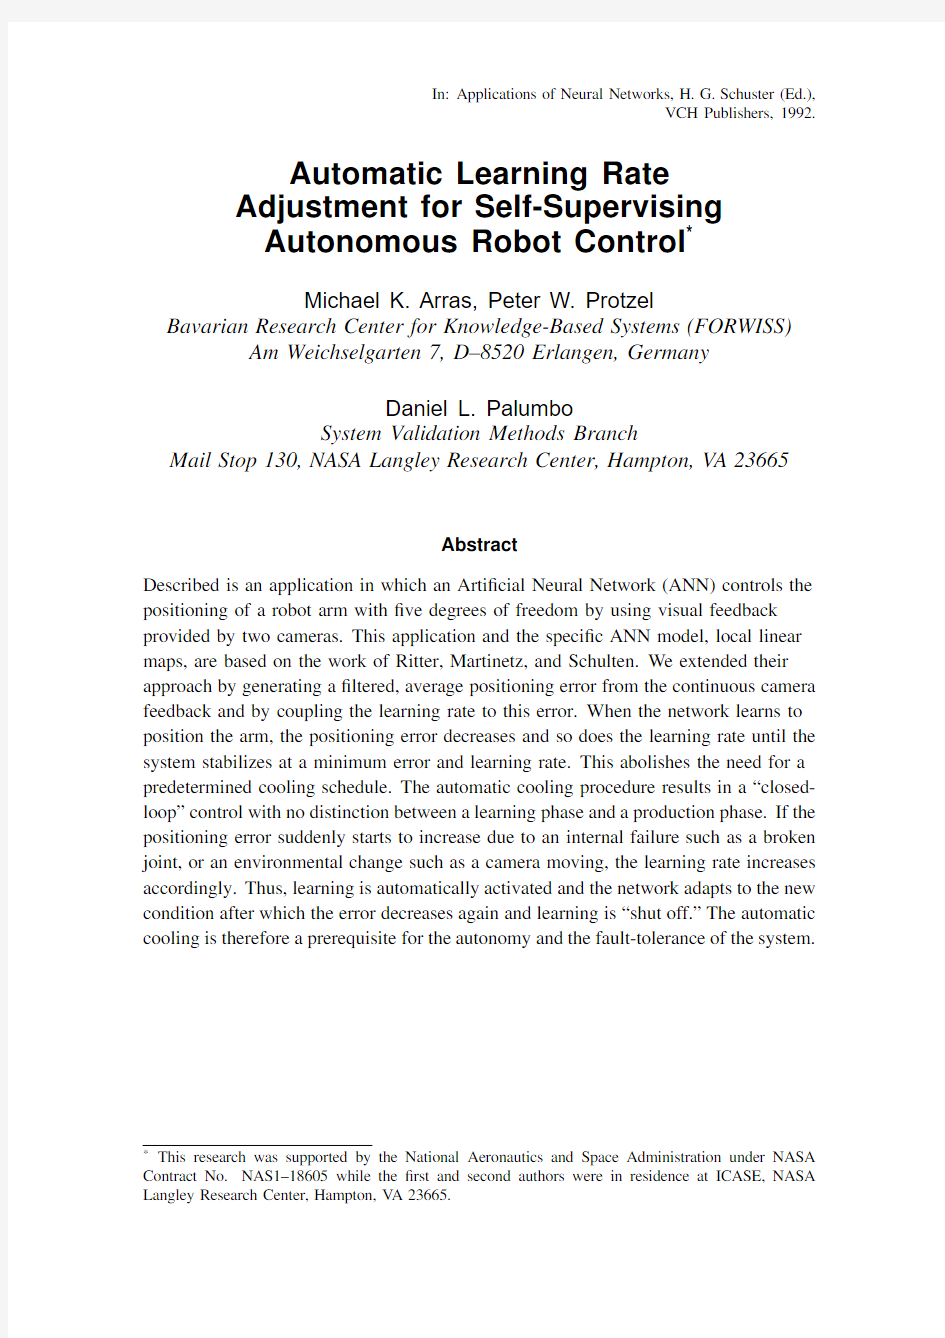 Automatic learning rate adjustment for self-supervising autonomous robot control